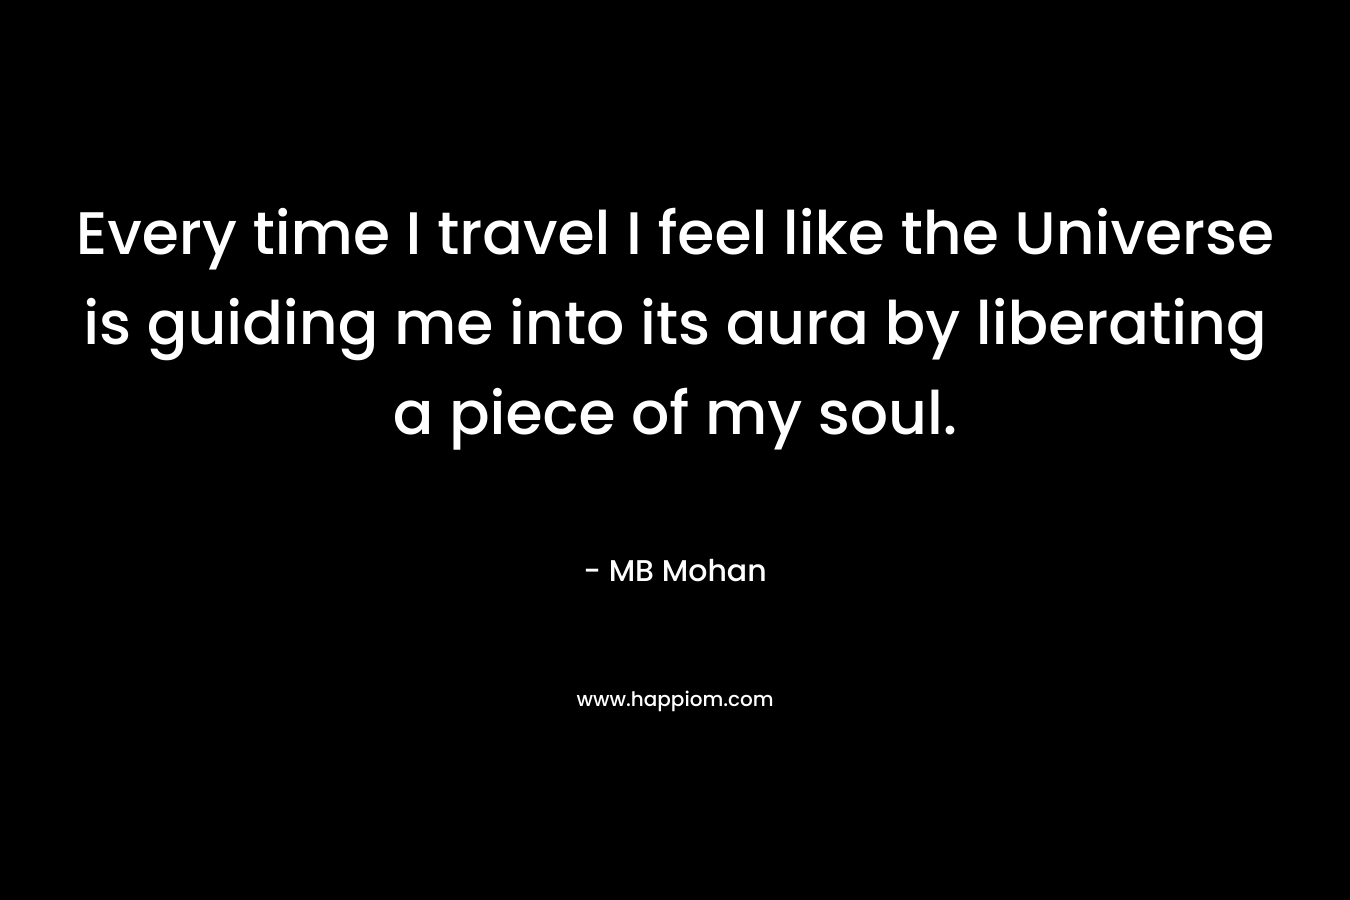 Every time I travel I feel like the Universe is guiding me into its aura by liberating a piece of my soul.